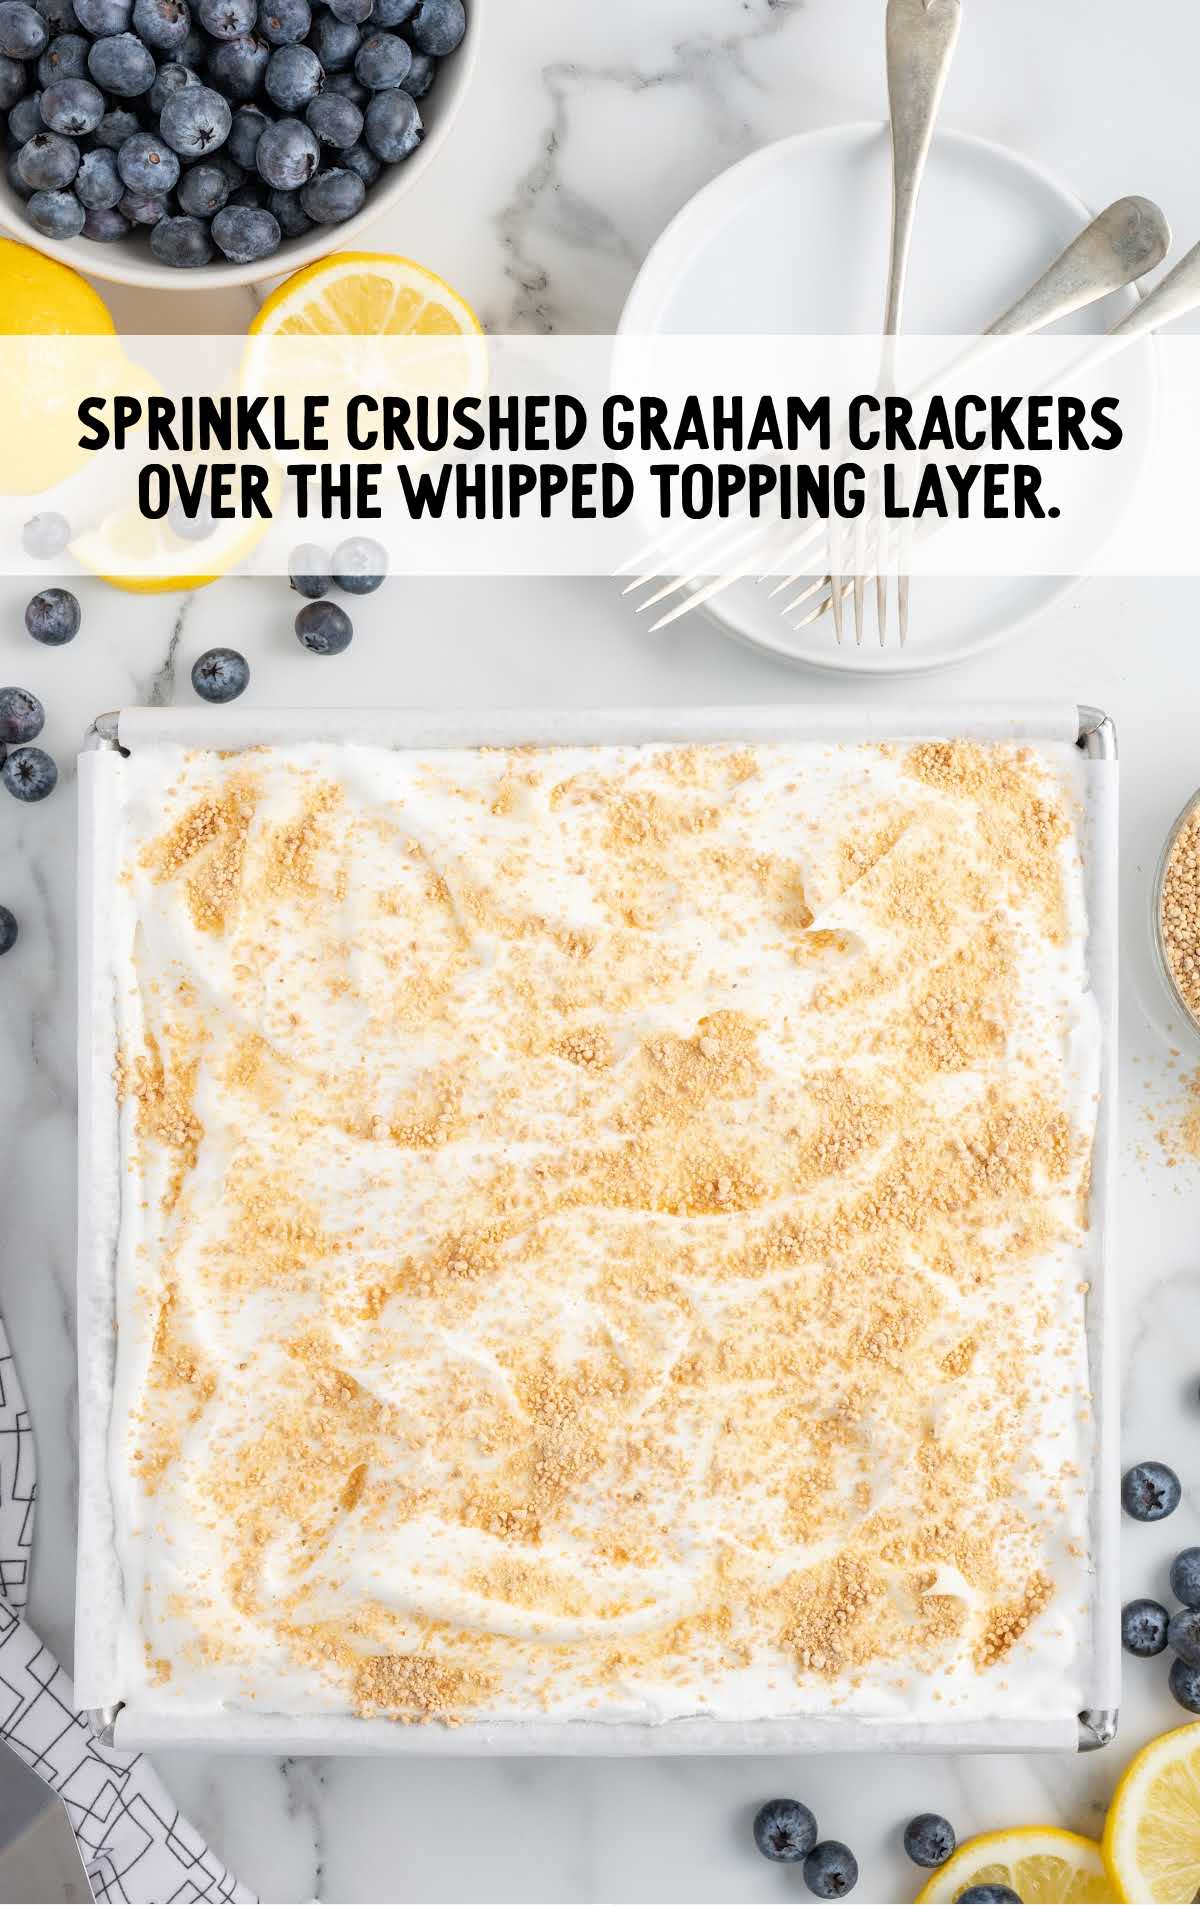 crushed graham crackers sprinkled over the whipped topping layer